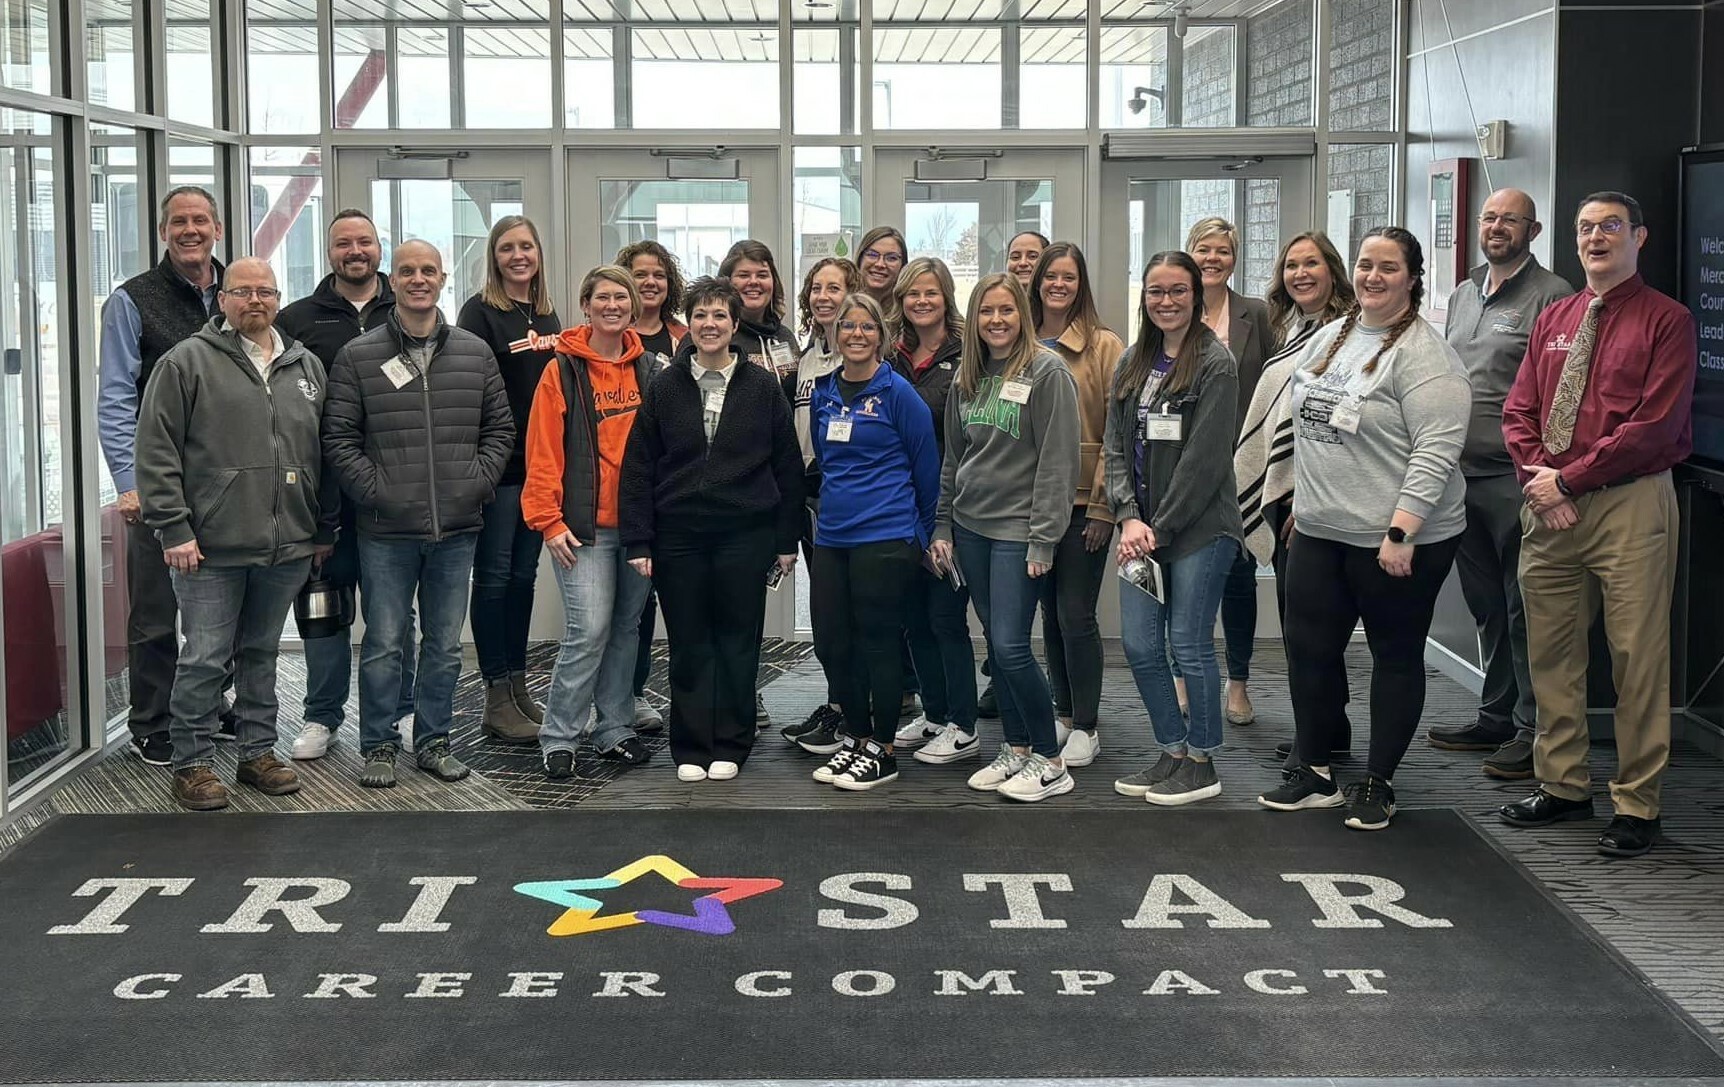  Mercer County Leadership in Action Group Tours Tri Star: Featured Image 1 